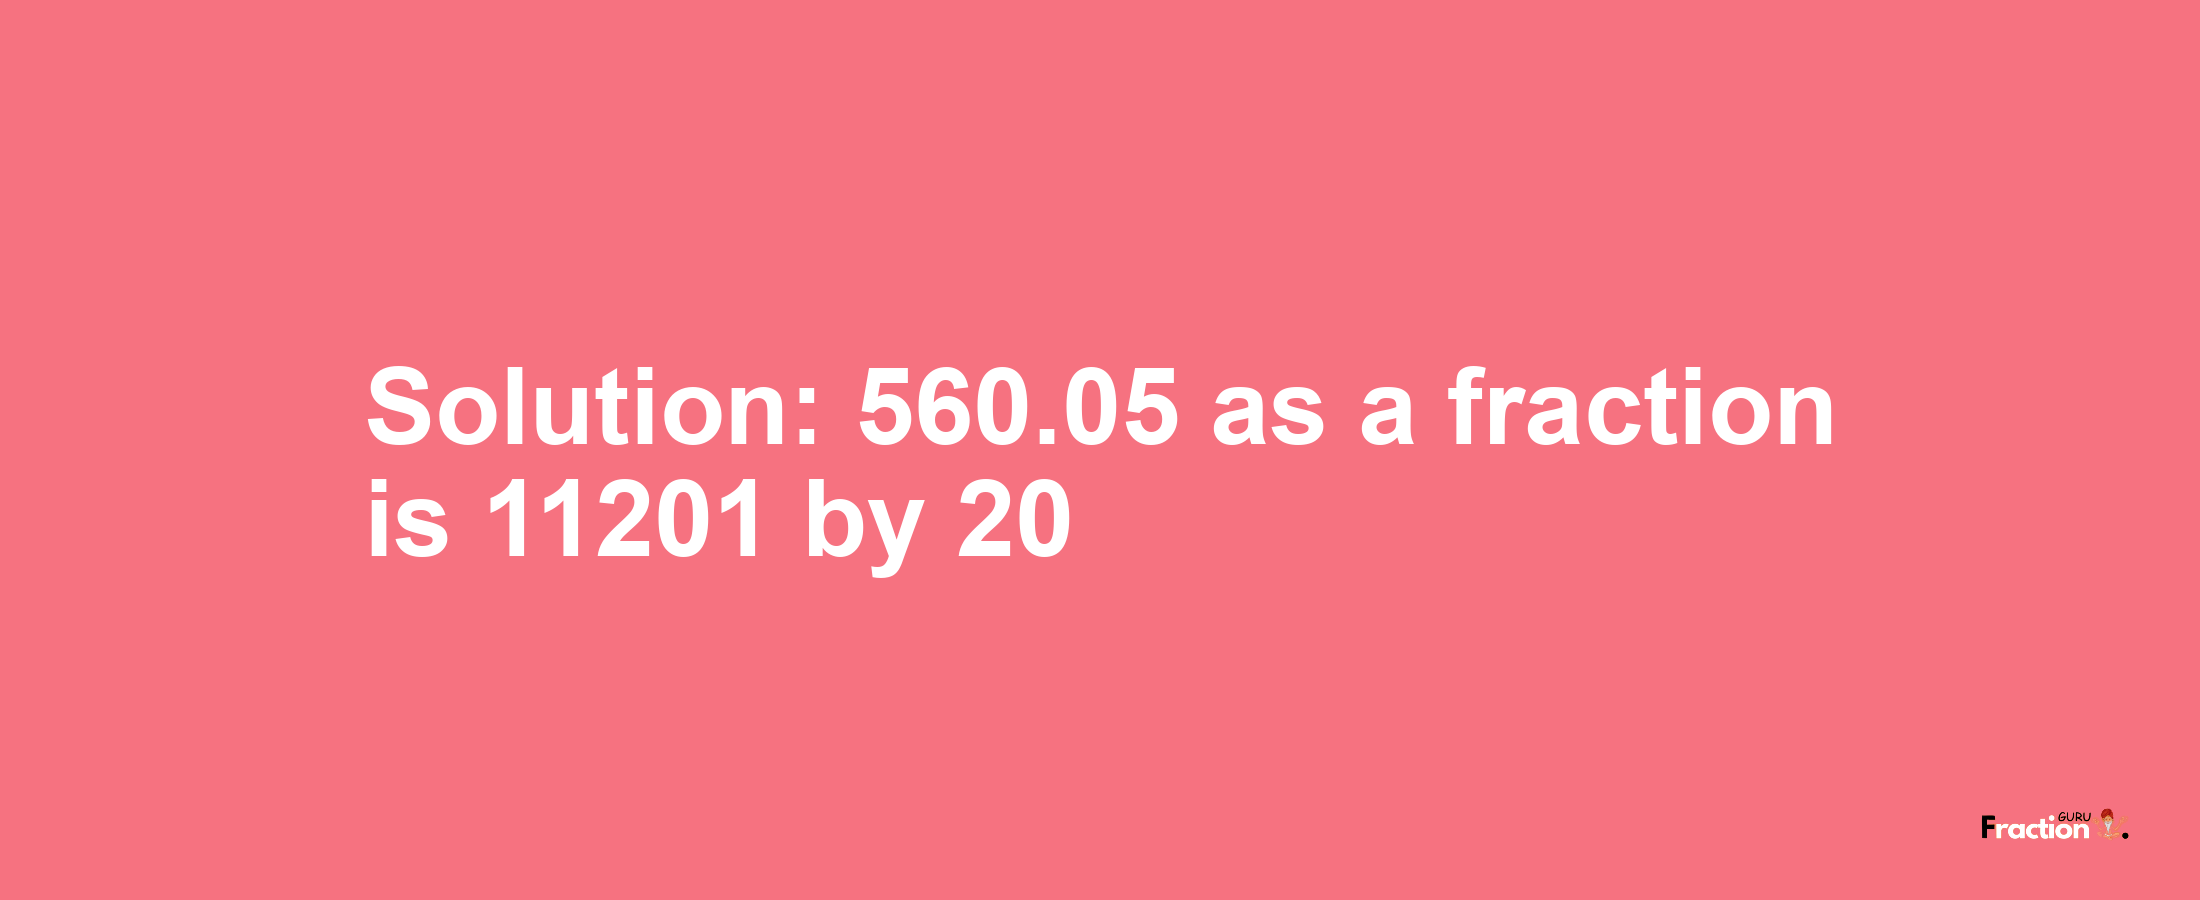 Solution:560.05 as a fraction is 11201/20